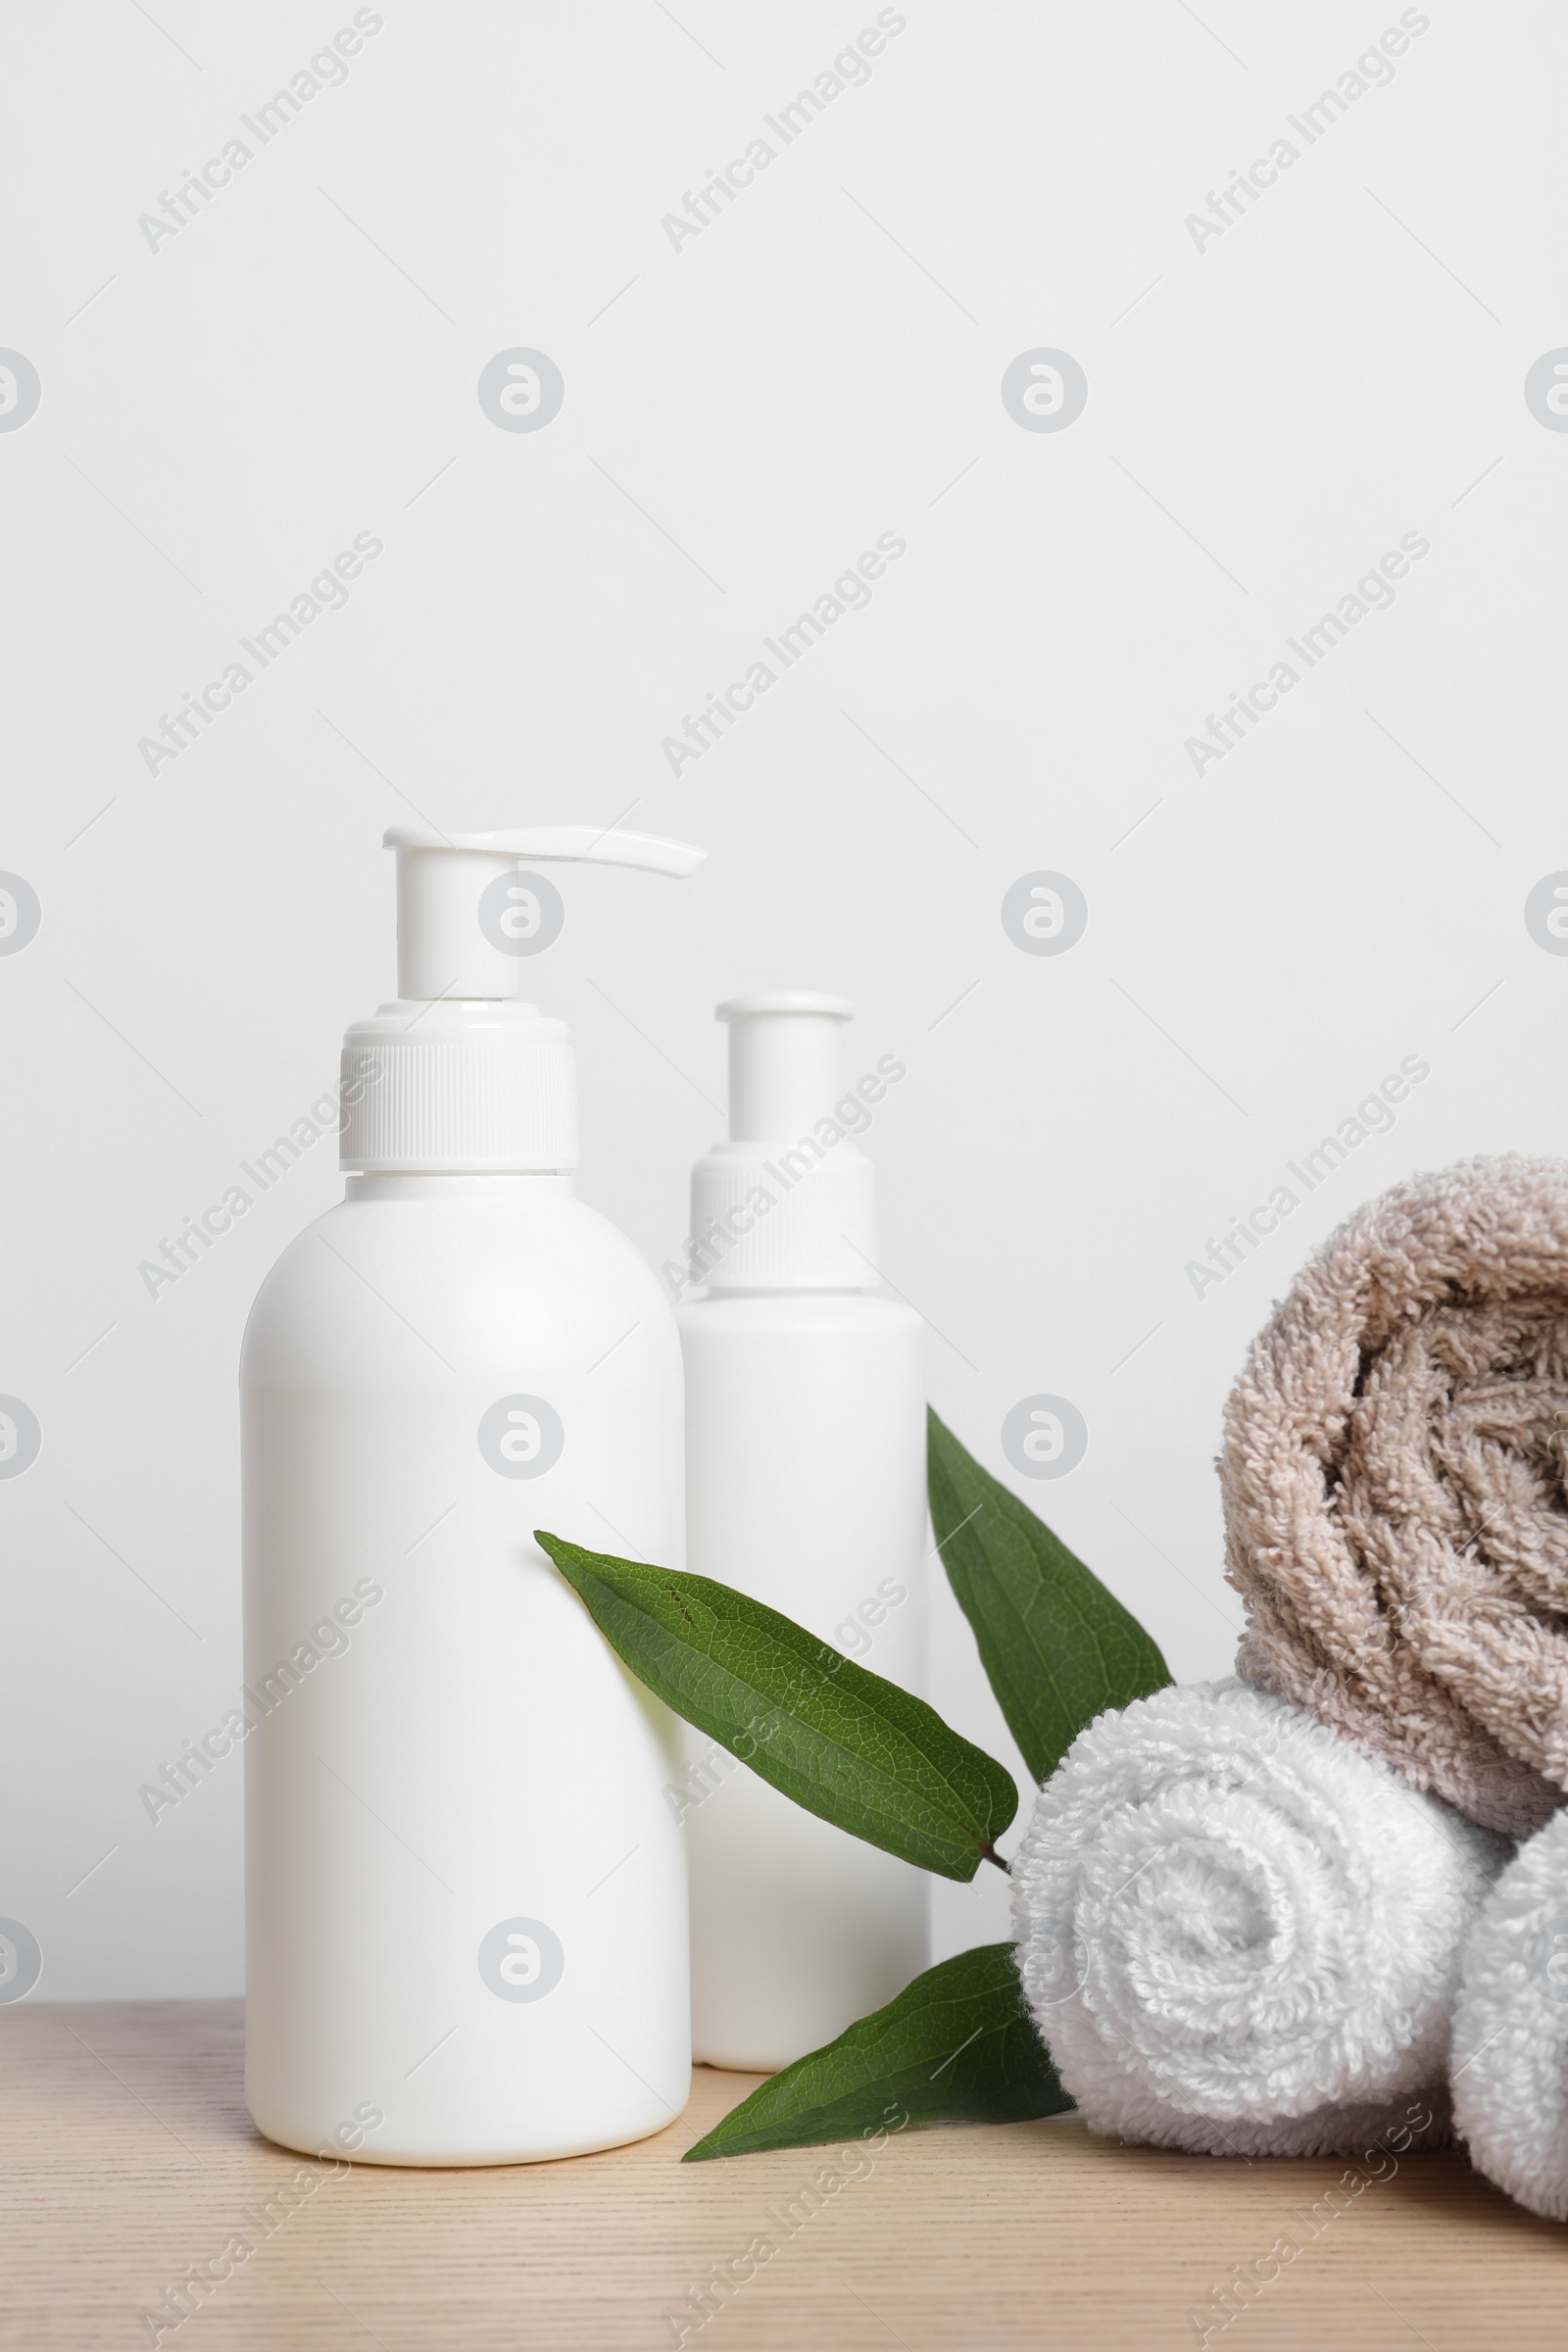 Photo of Bottles of cosmetic products, leaves and towels on wooden table